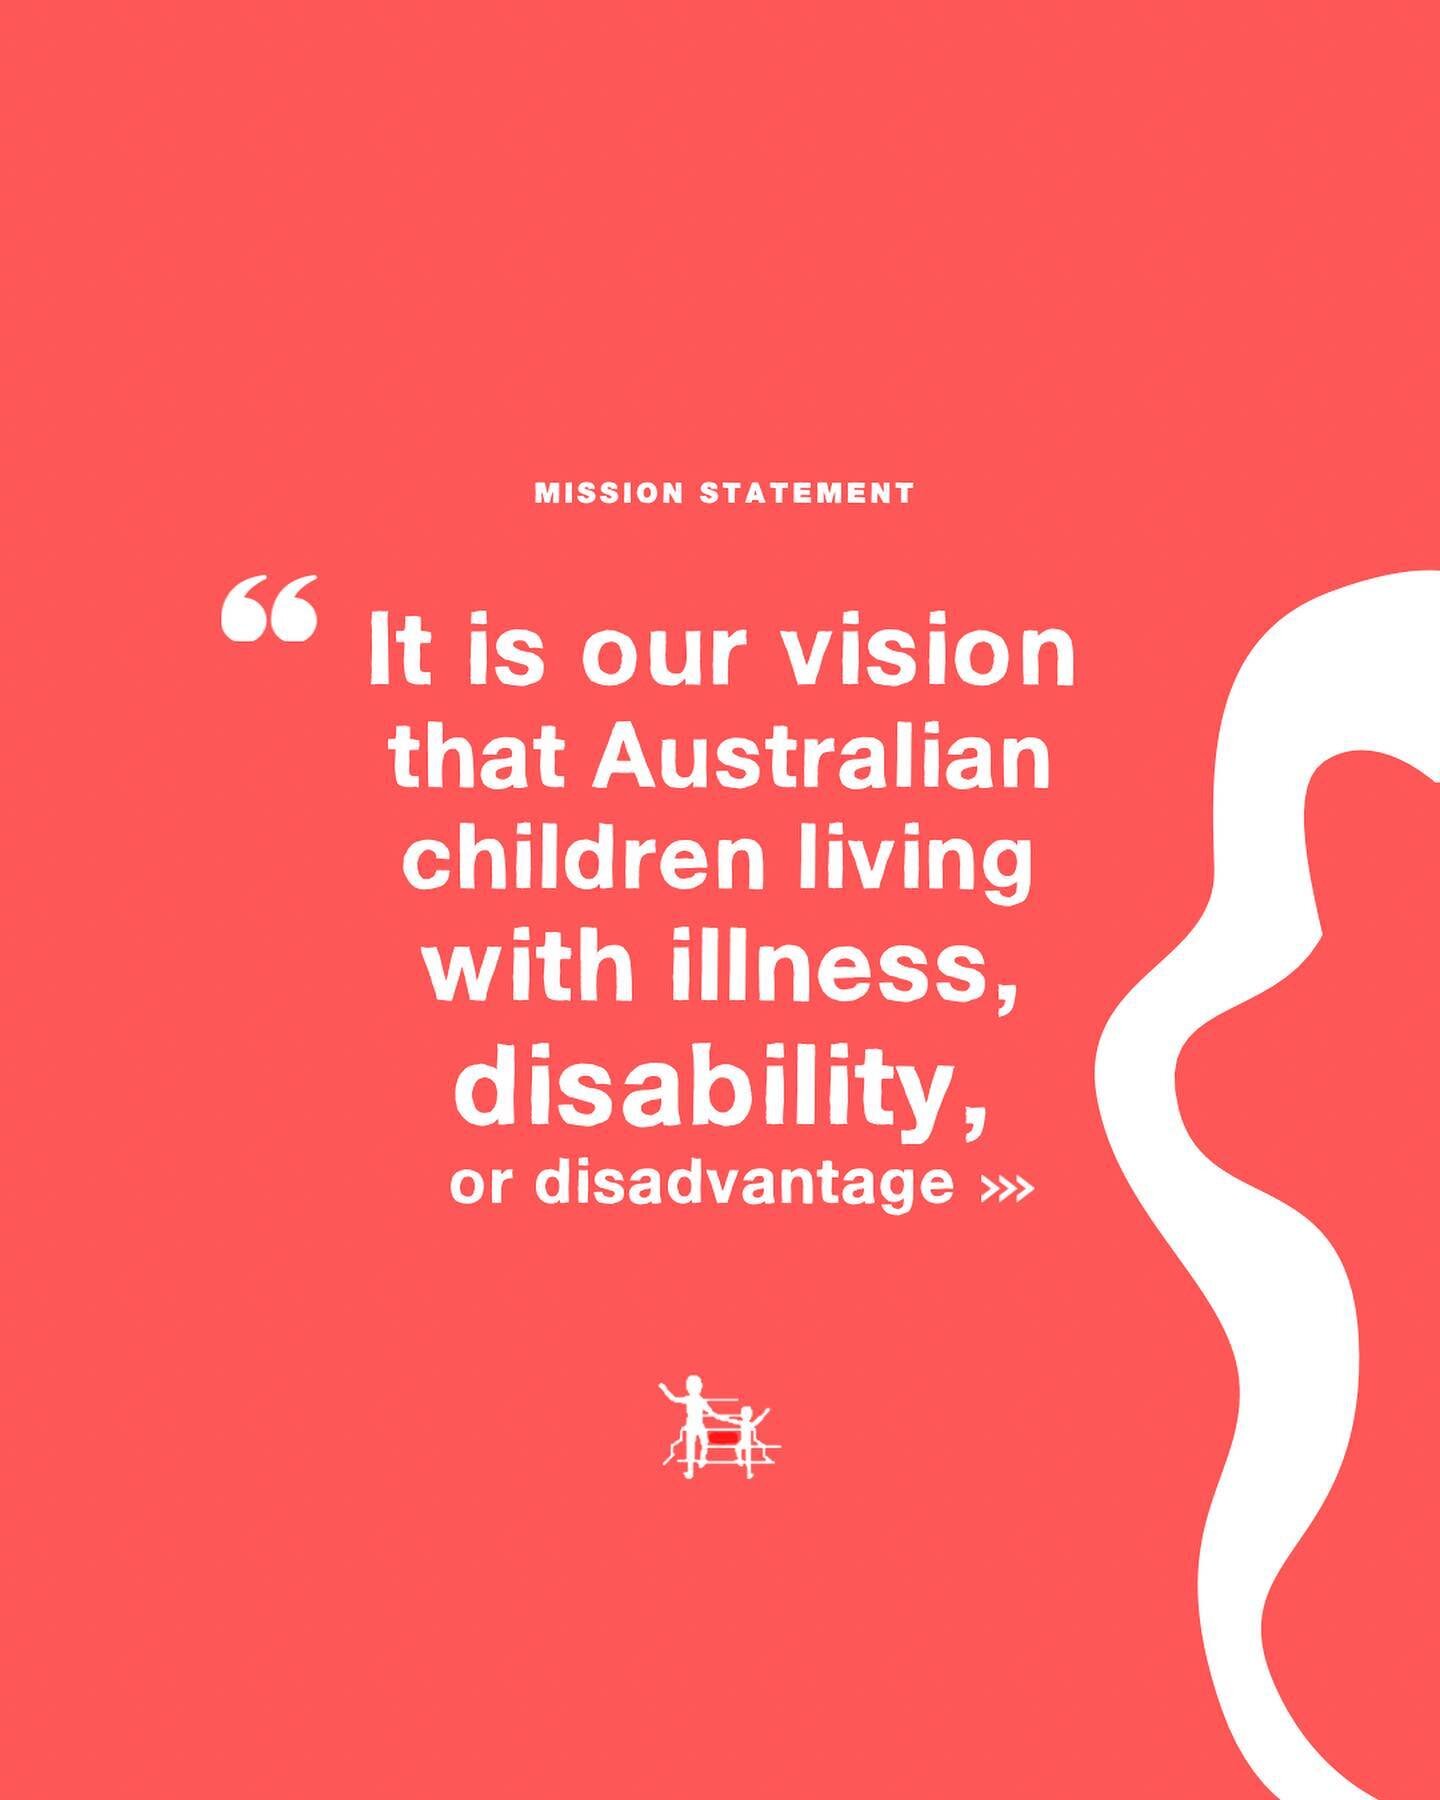 The Heartwell Foundation Mission Statement. 

#CreatingALevelPlayingField 

Slide one
In white text over pale red background: &ldquo;Mission Statement: It is our vision that Australian children, living with illness, disability, or disadvantage &helli